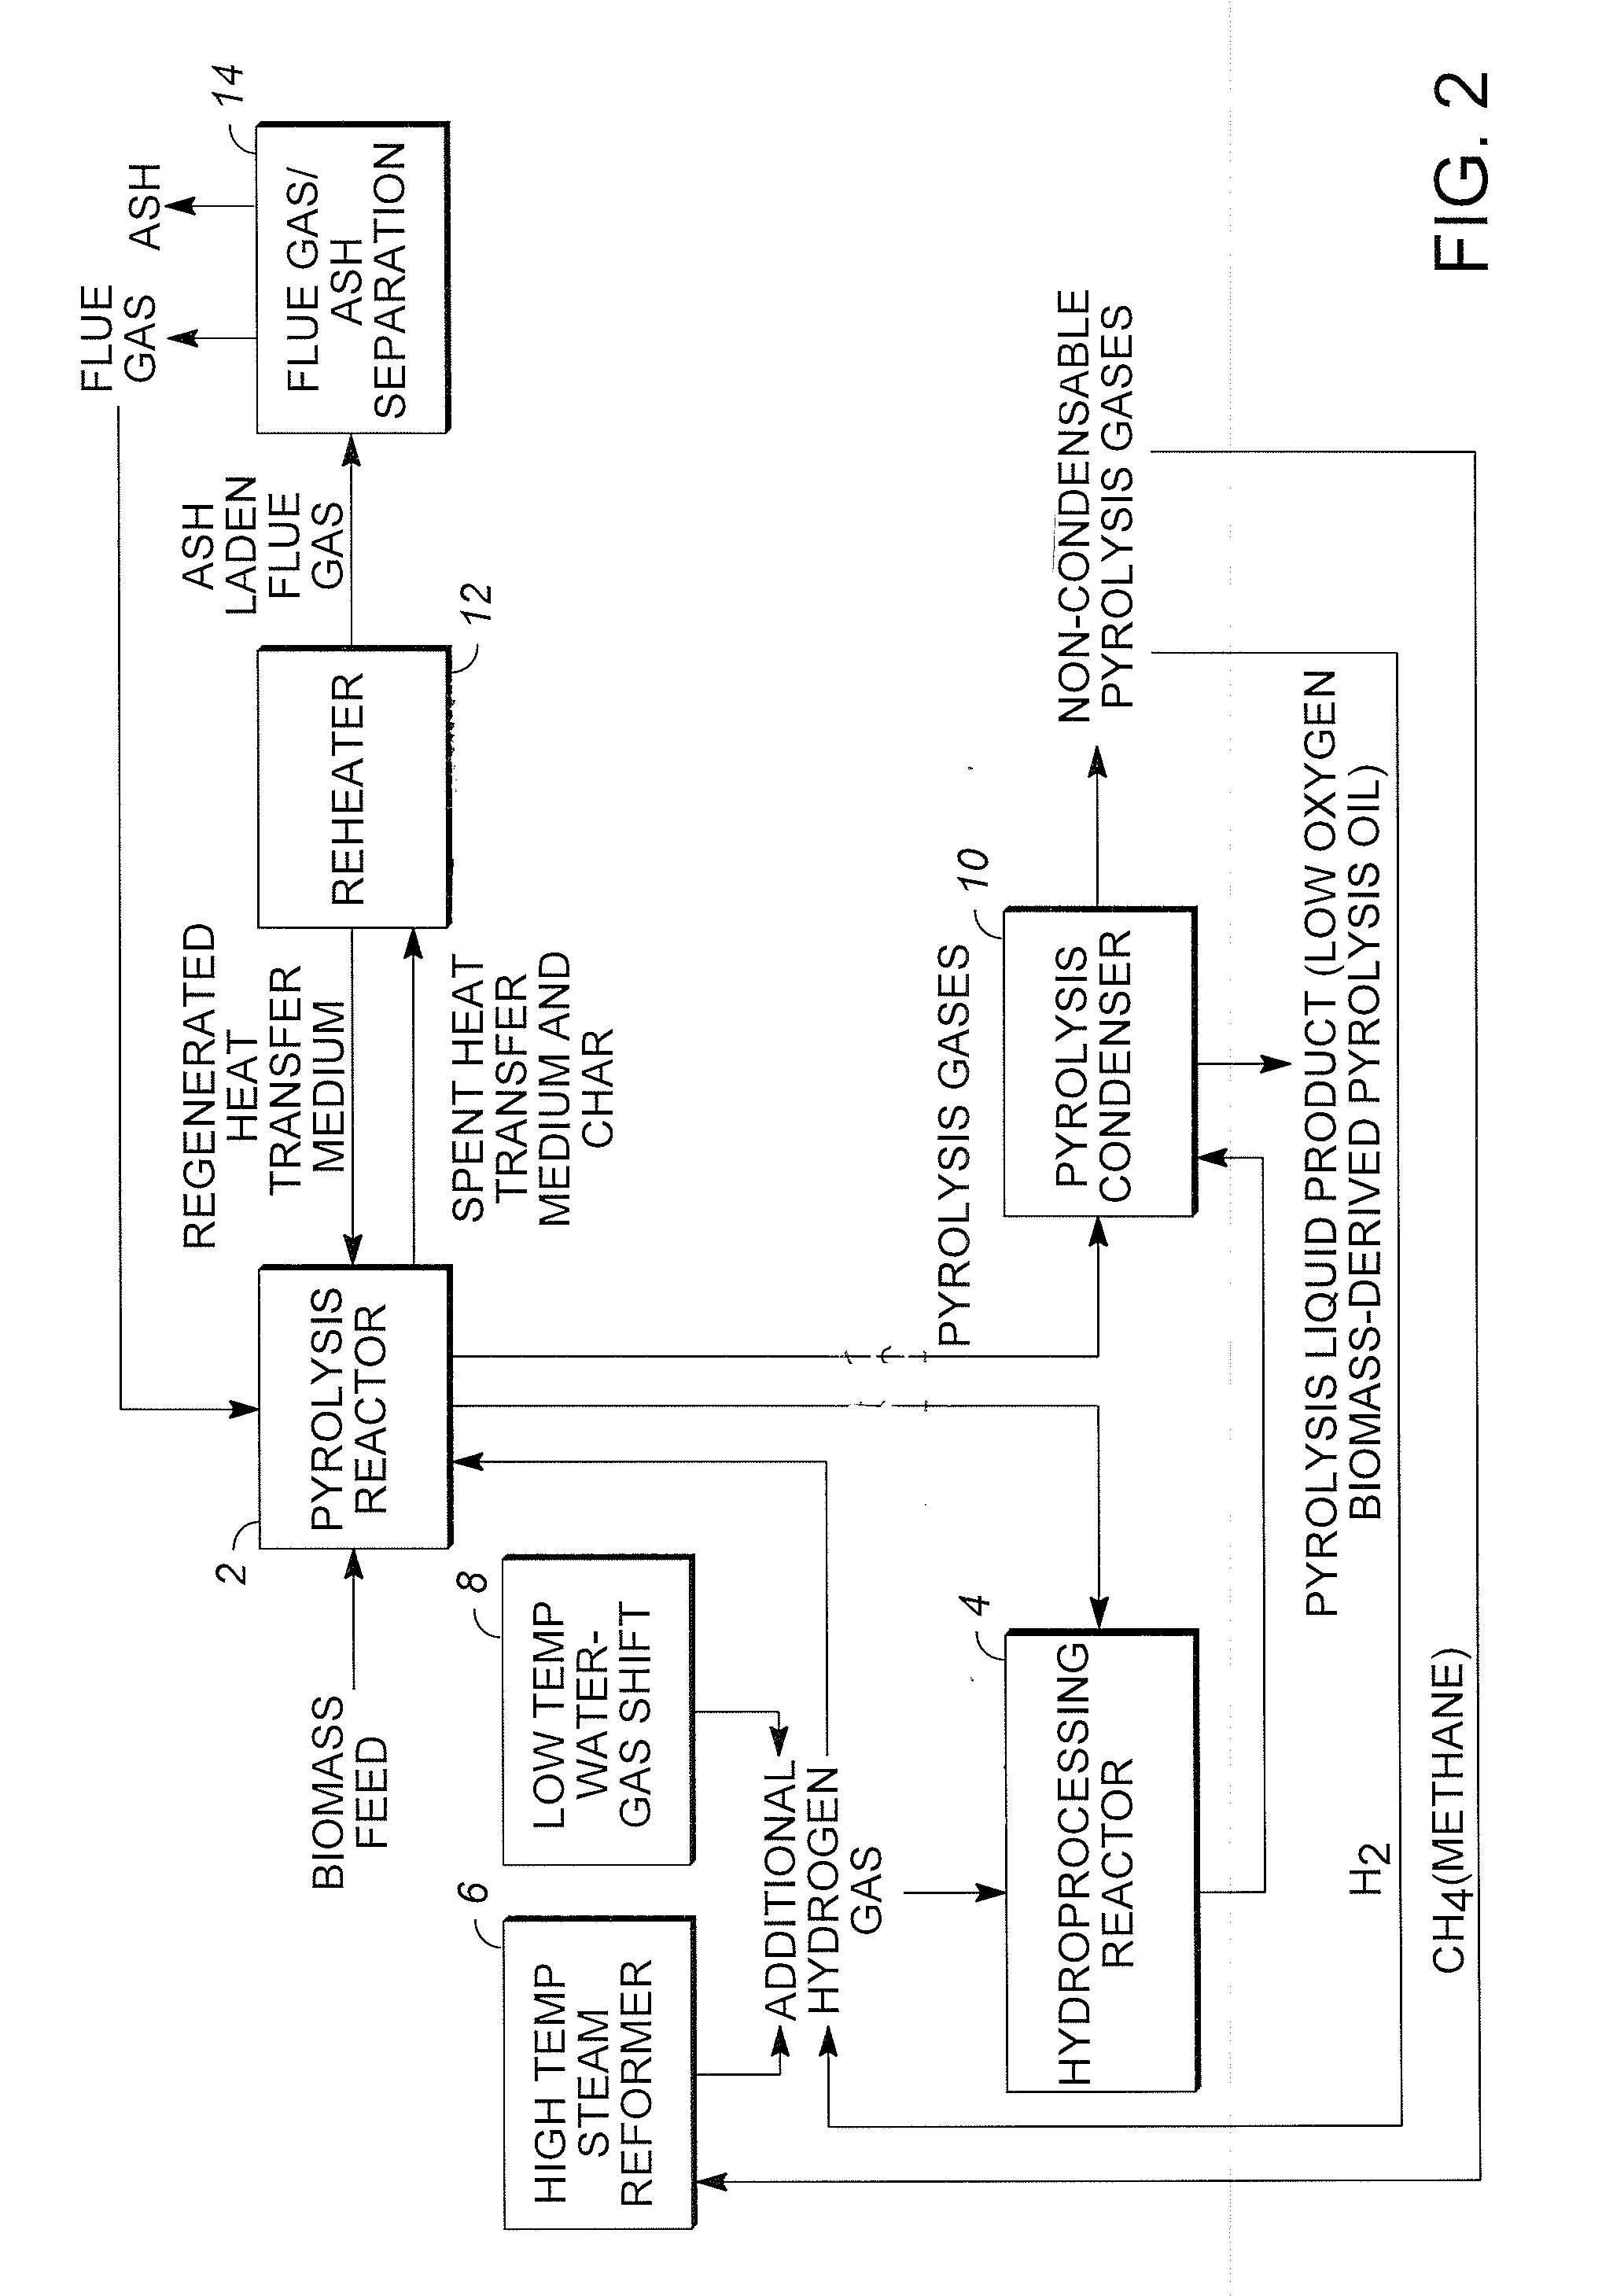 Low oxygen biomass-derived pyrolysis oils and methods for producing the same